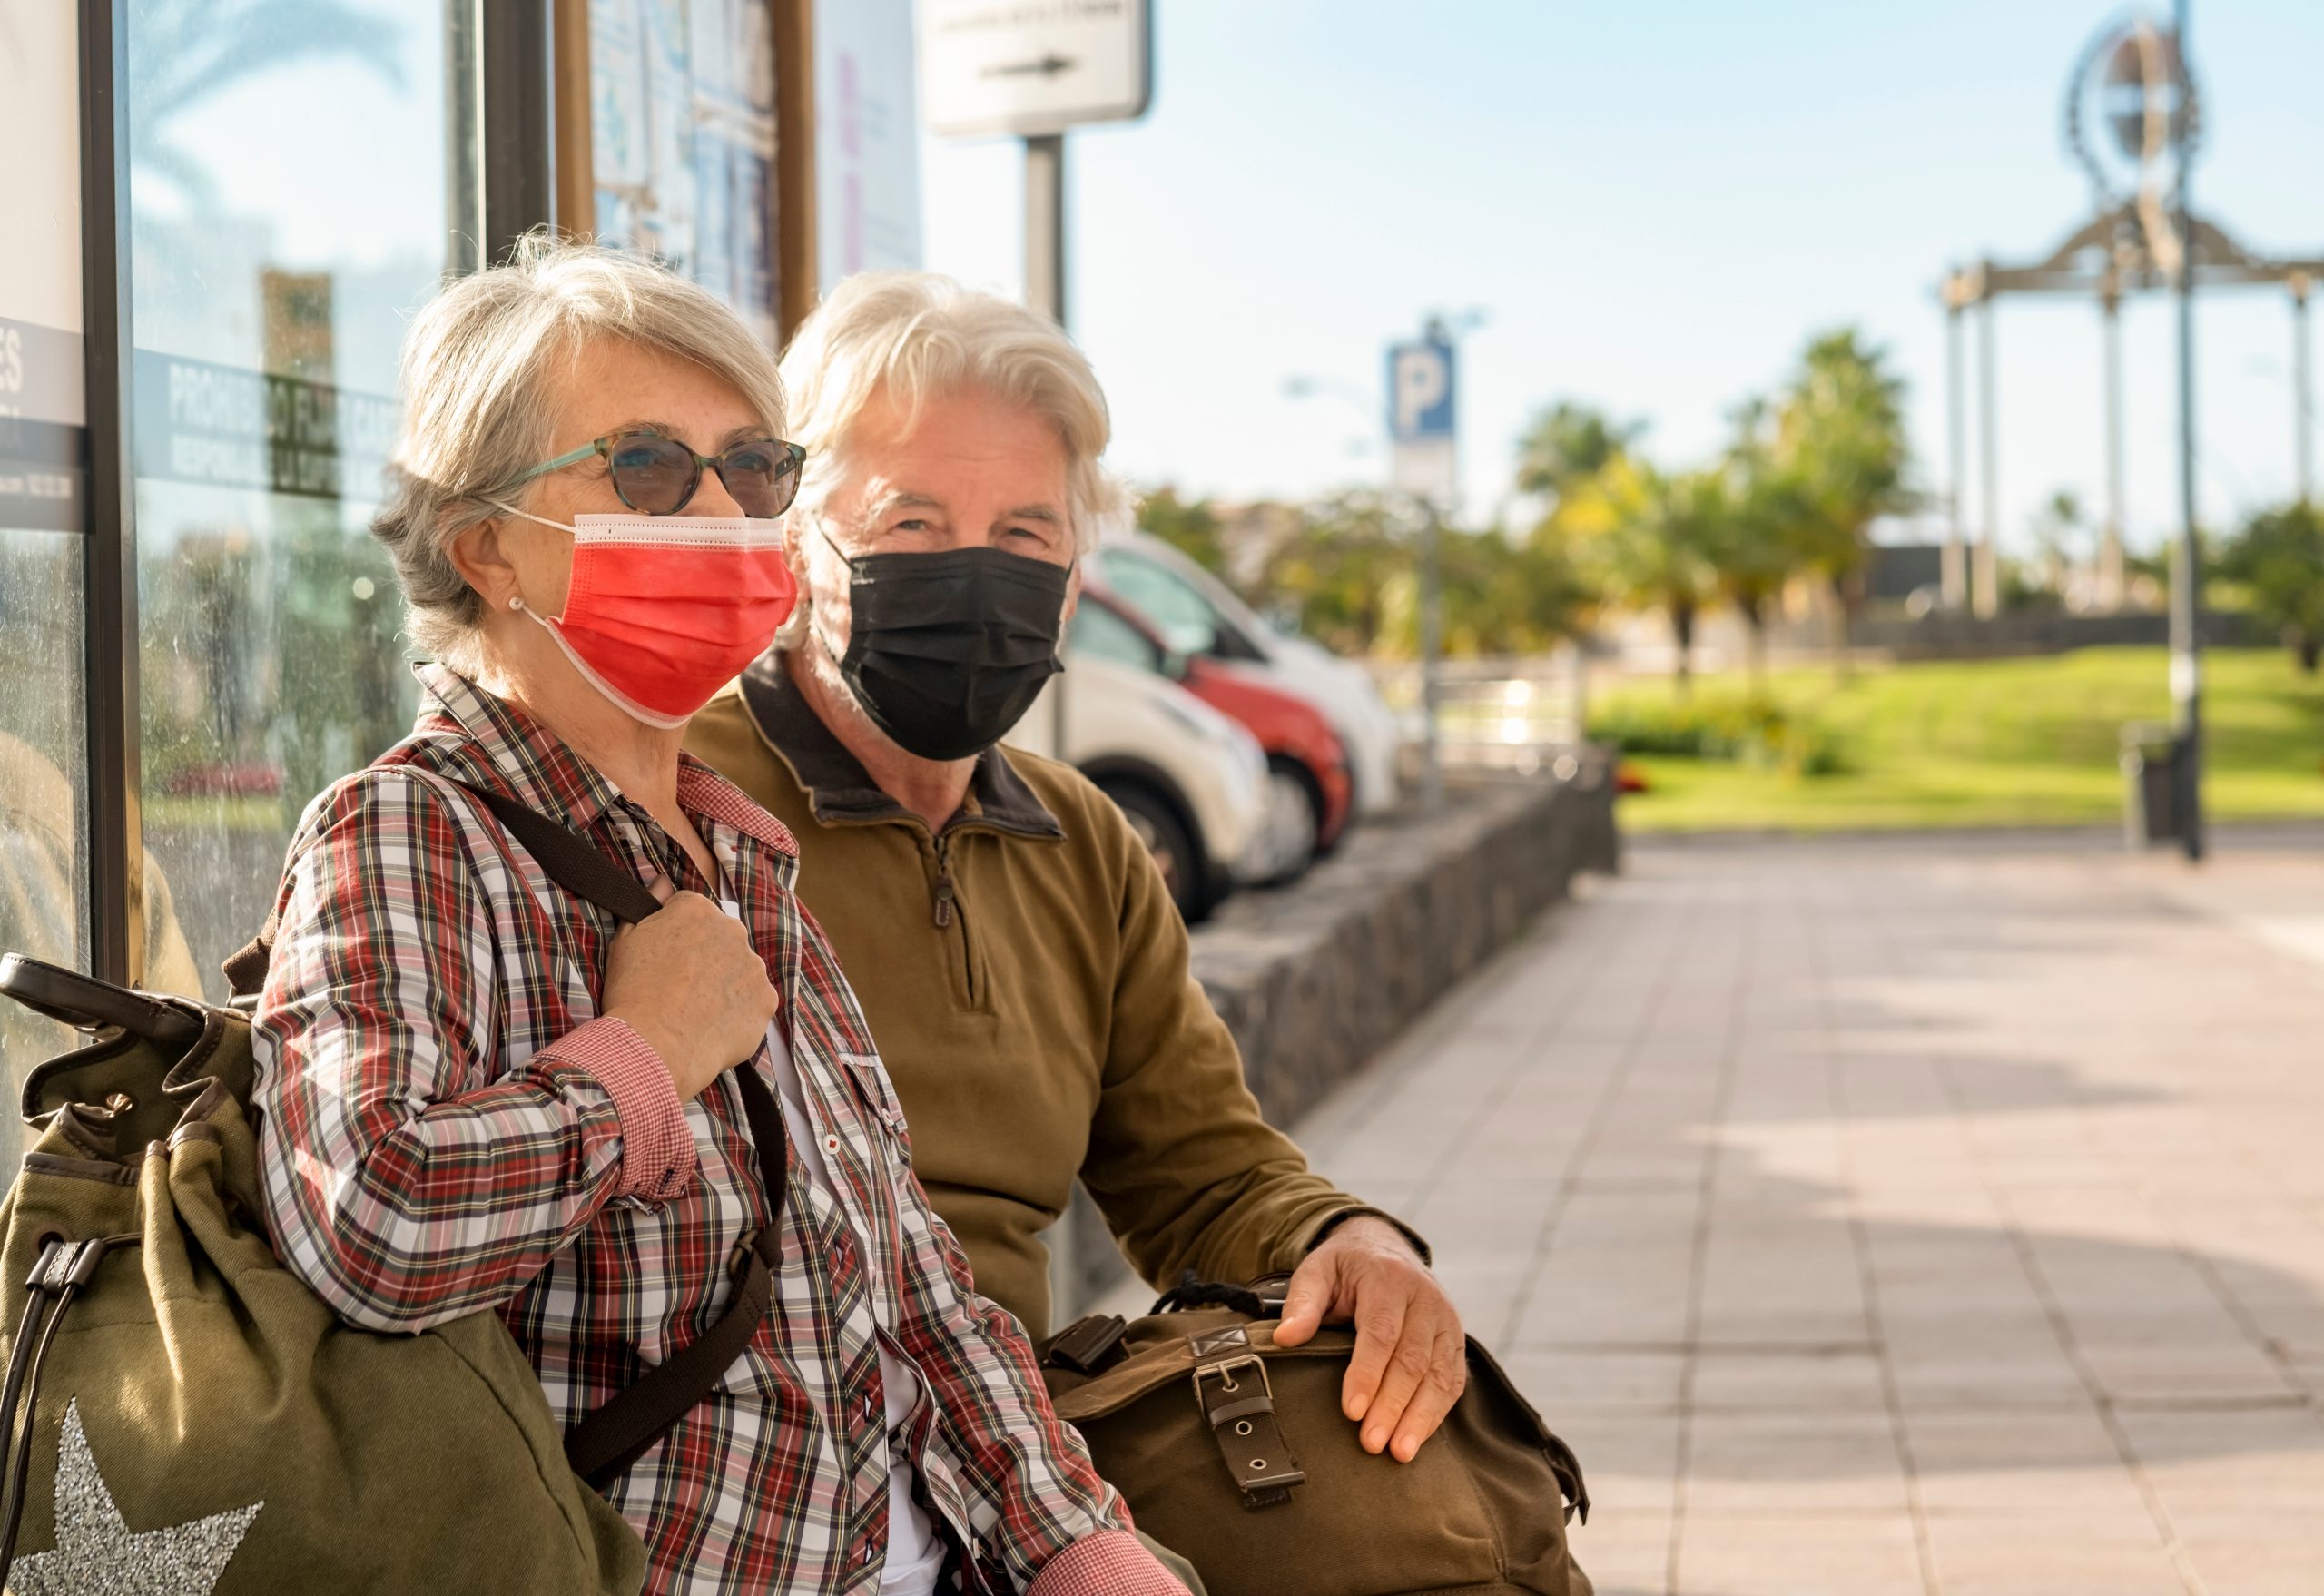 Elderly people waiting for a bus   wearing COVID mask